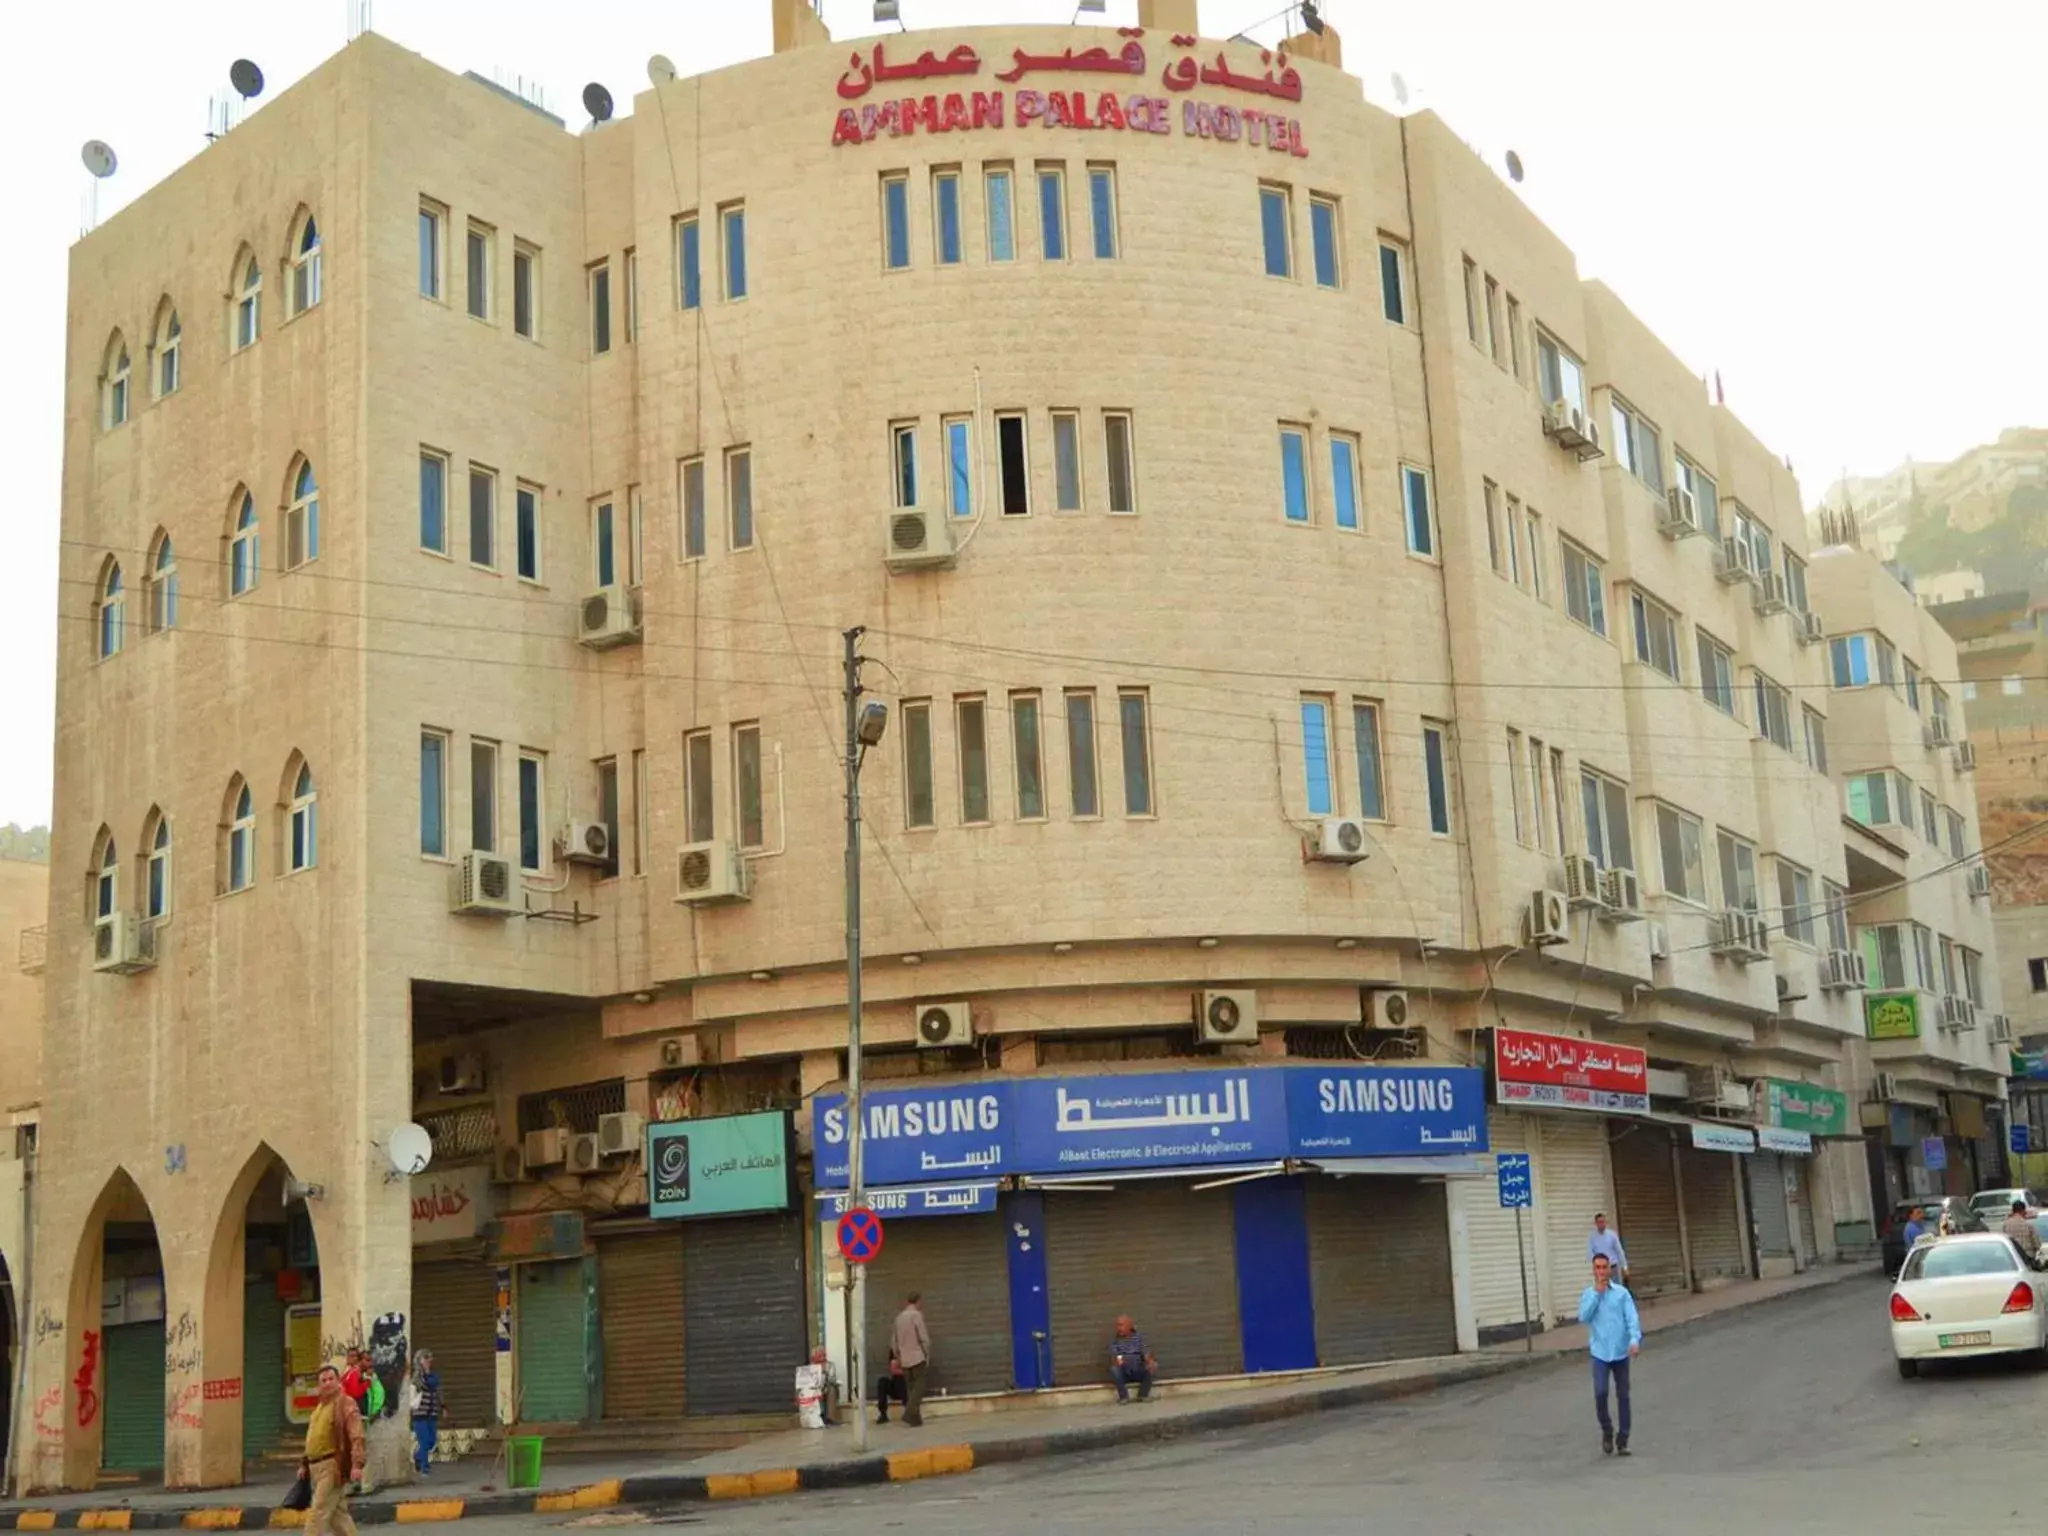 Property Building in Amman Palace Hotel